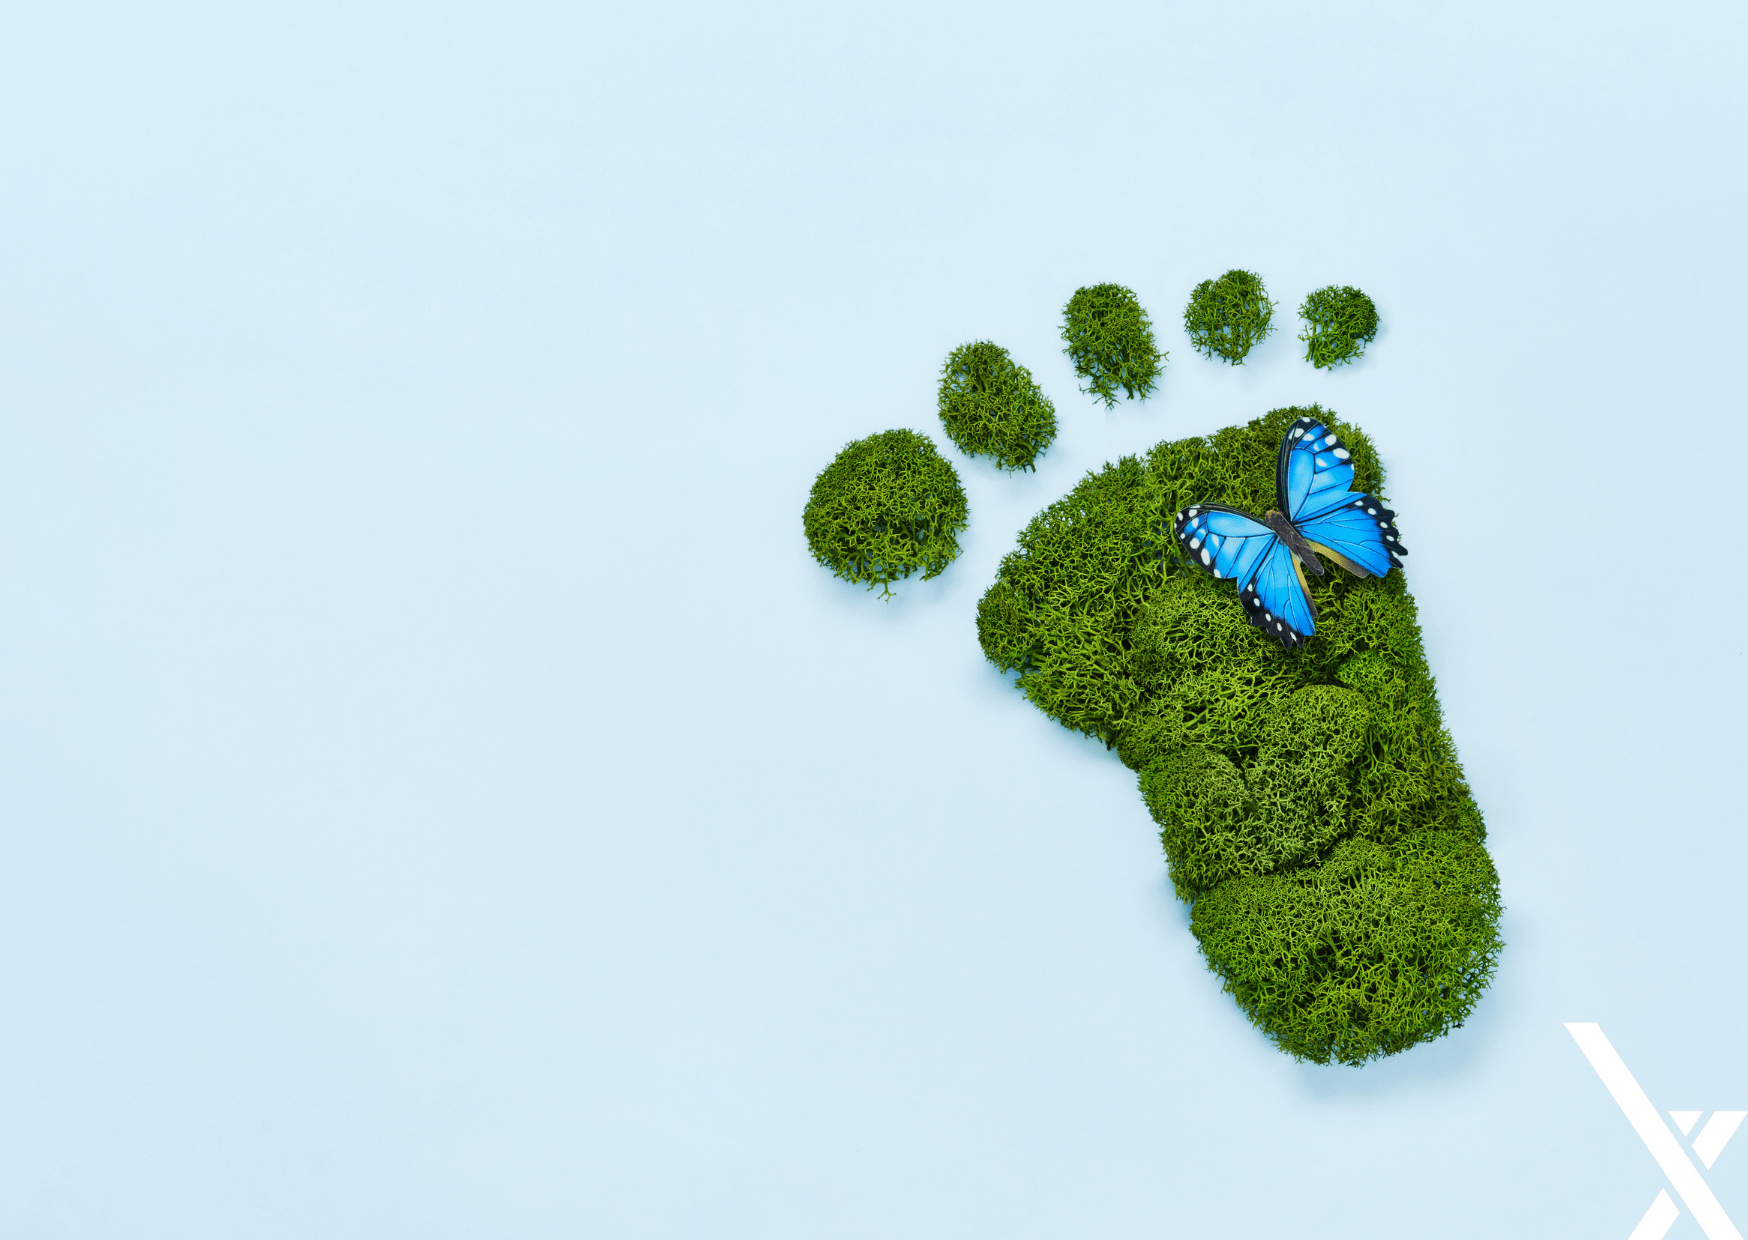 7 tips to reduce your ecological footprint